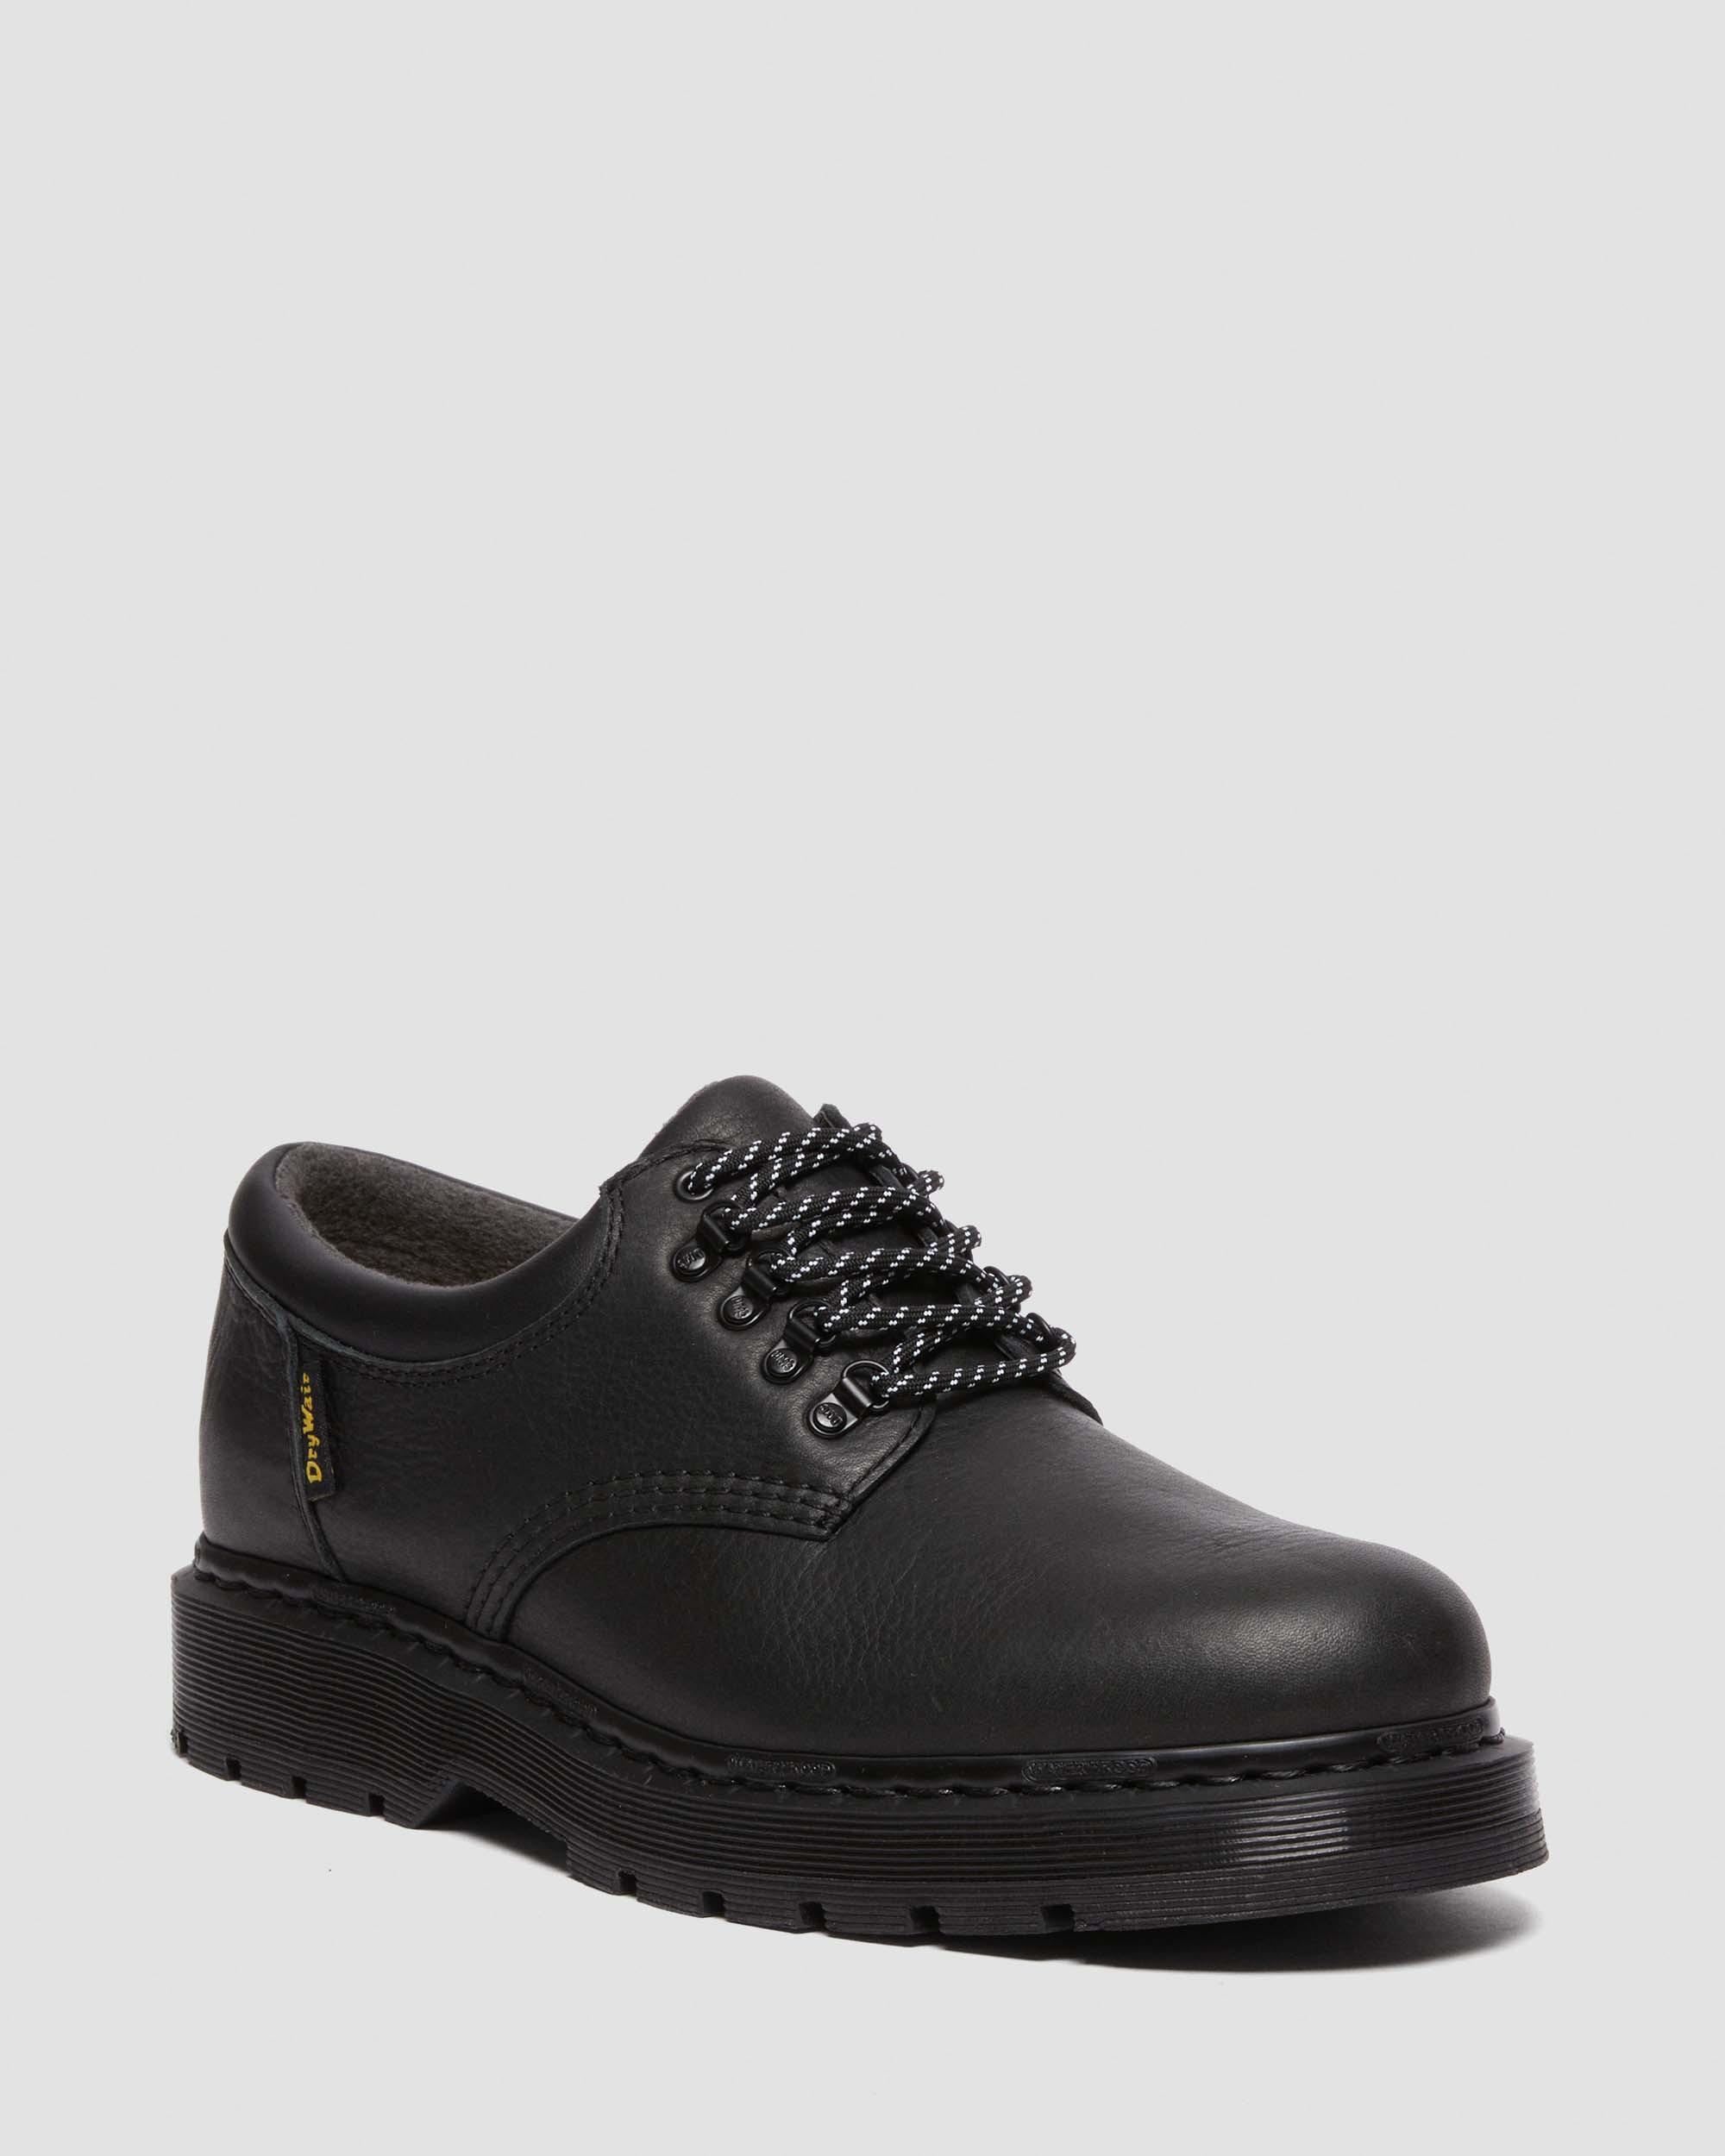 Dr. Martens' 8053 Quad Mono Leather Oxford Shoes In Schwarz